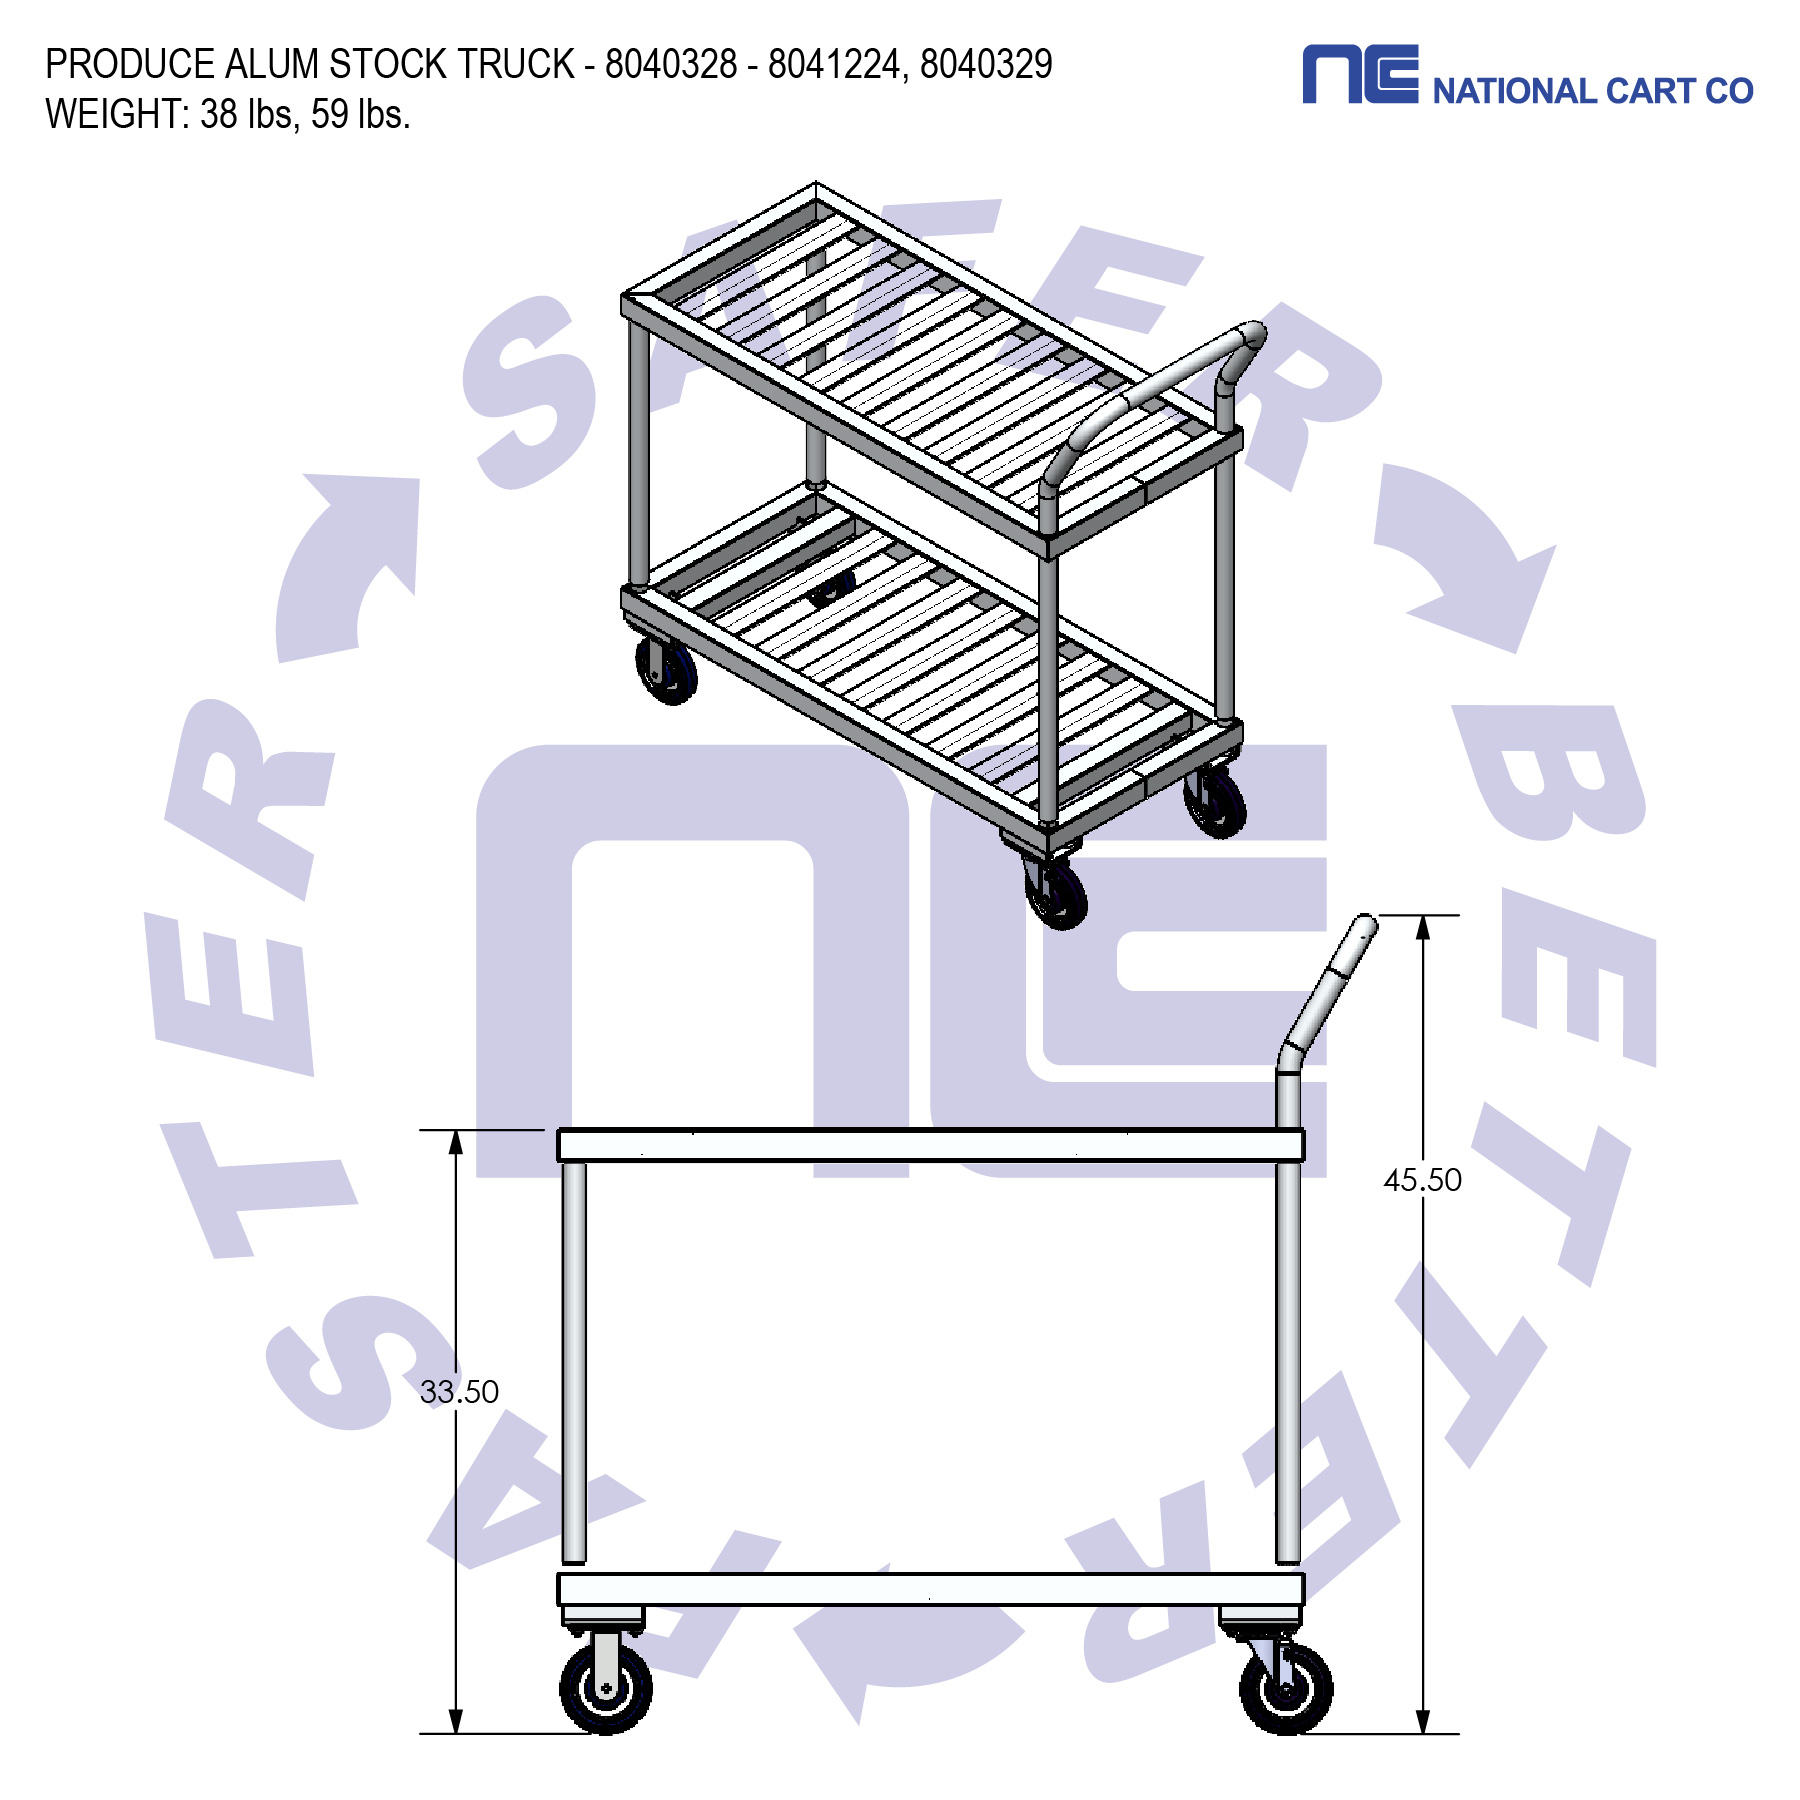 8041224_Dim industrial cart nesting picking cart NSF cart NSF rack NSF approved NSF certified National Sanitation Foundation tray shelf Distribution Cart picking cart tray shelf picking cart, picking cart, ecom cart, ecommerce cart, ecommerce picking cart, picking cart, INDUSTRIAL CARTS, grocery cart grocery picking cart, department store cart, beverage cart NSF approved. This food service cart meets strict standards and procedures imposed by NSF. lug cart meat department, produce department